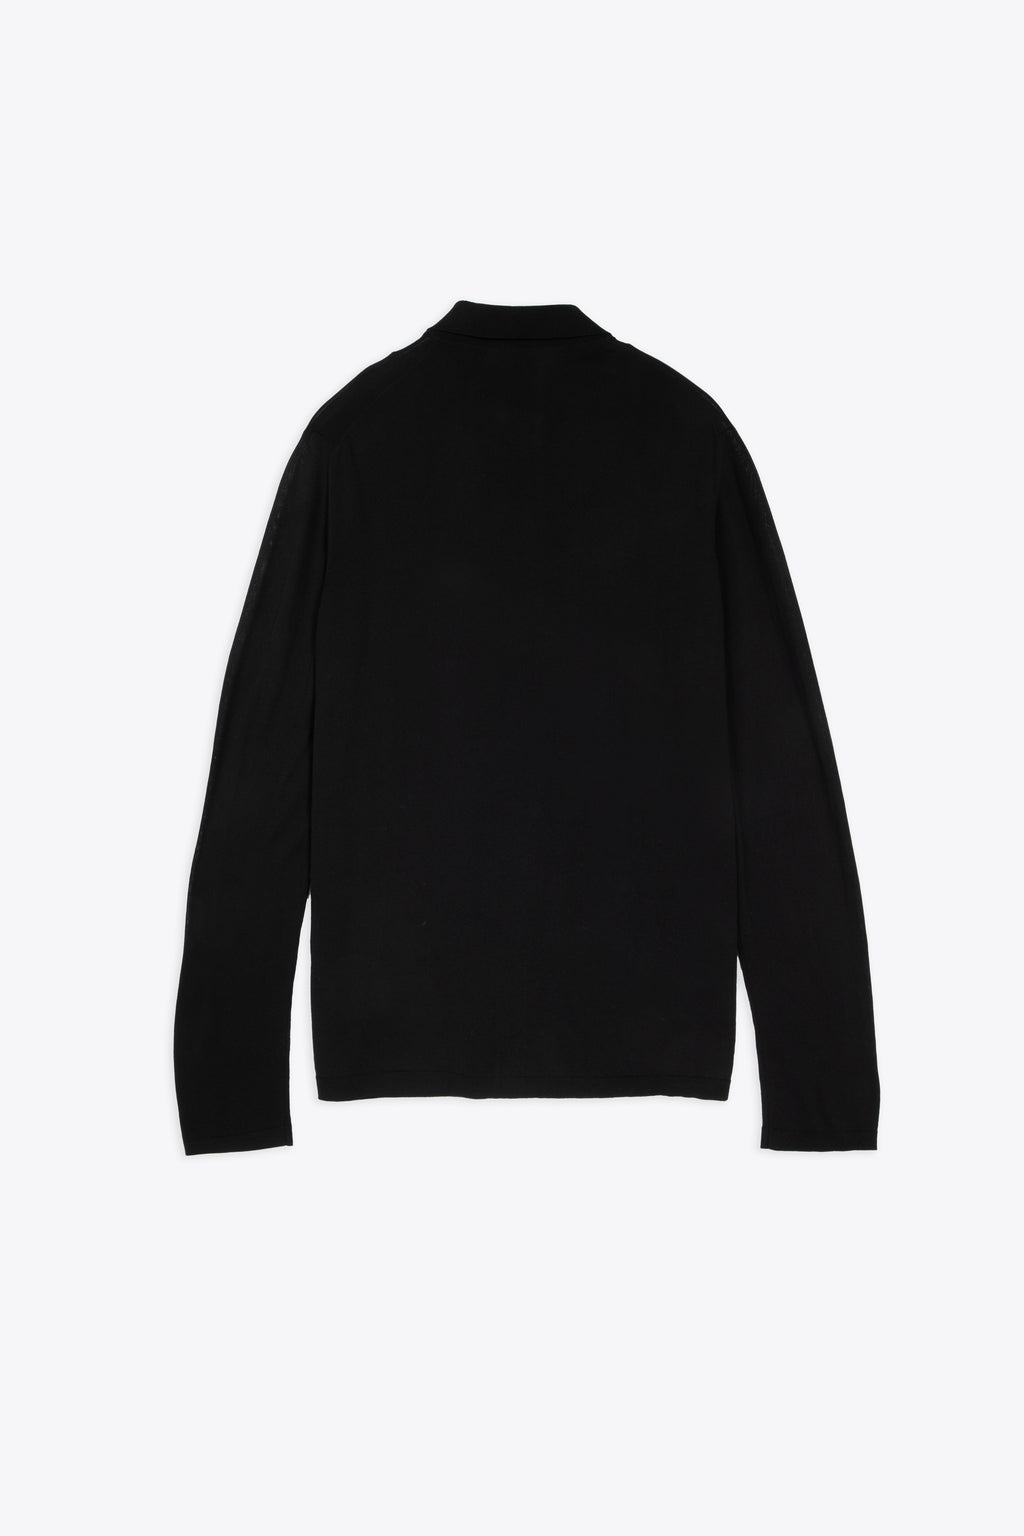 alt-image__Black-cotton-knit-shirt-with-long-sleeves